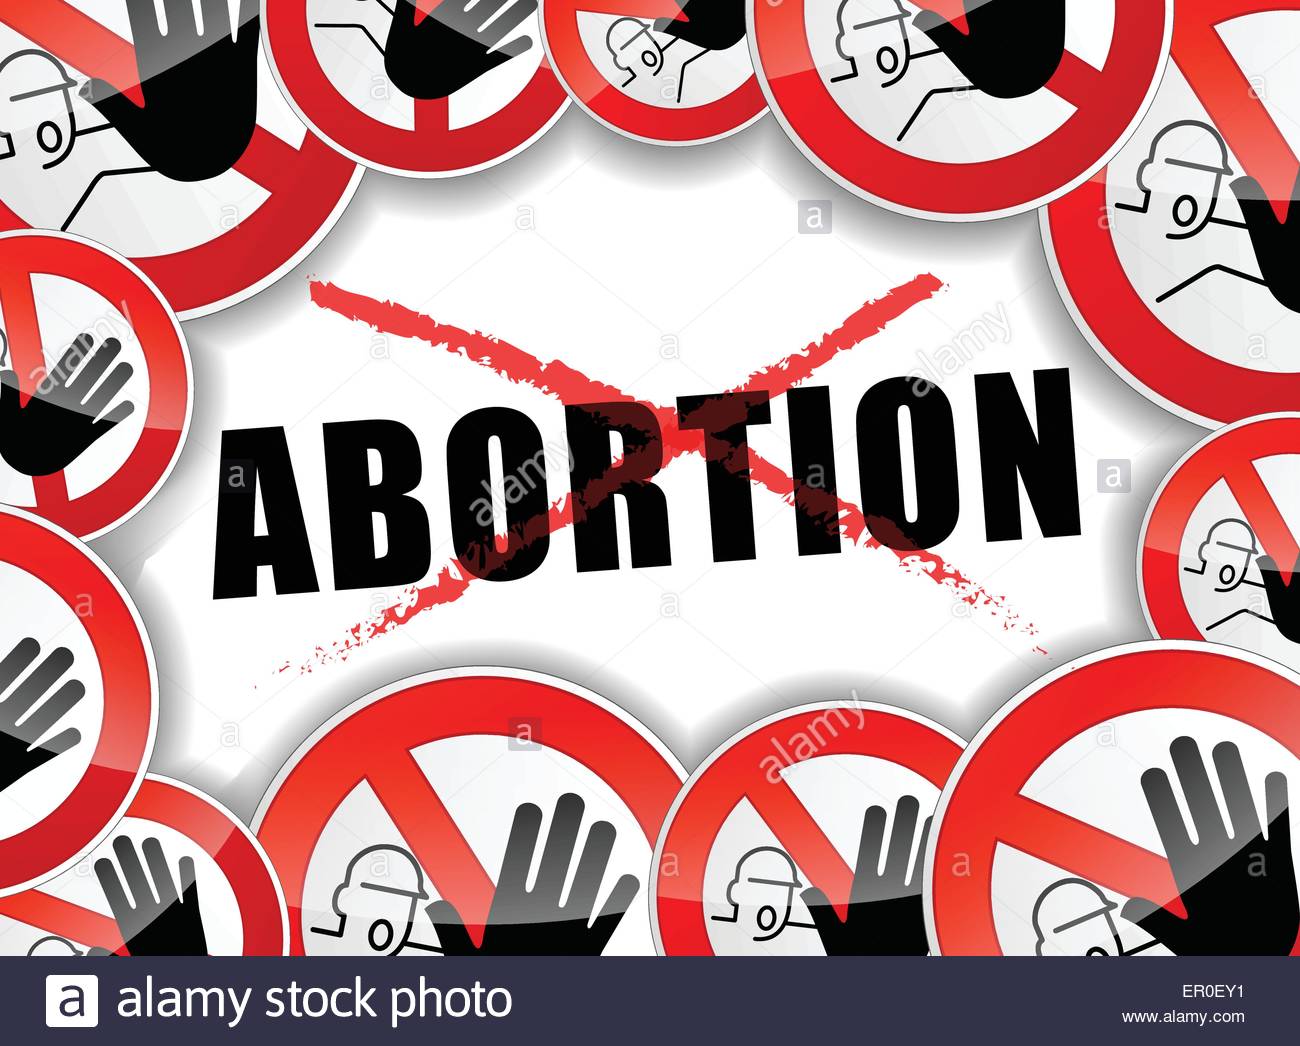 Illustration Of No Abortion Abstract Concept Background Stock